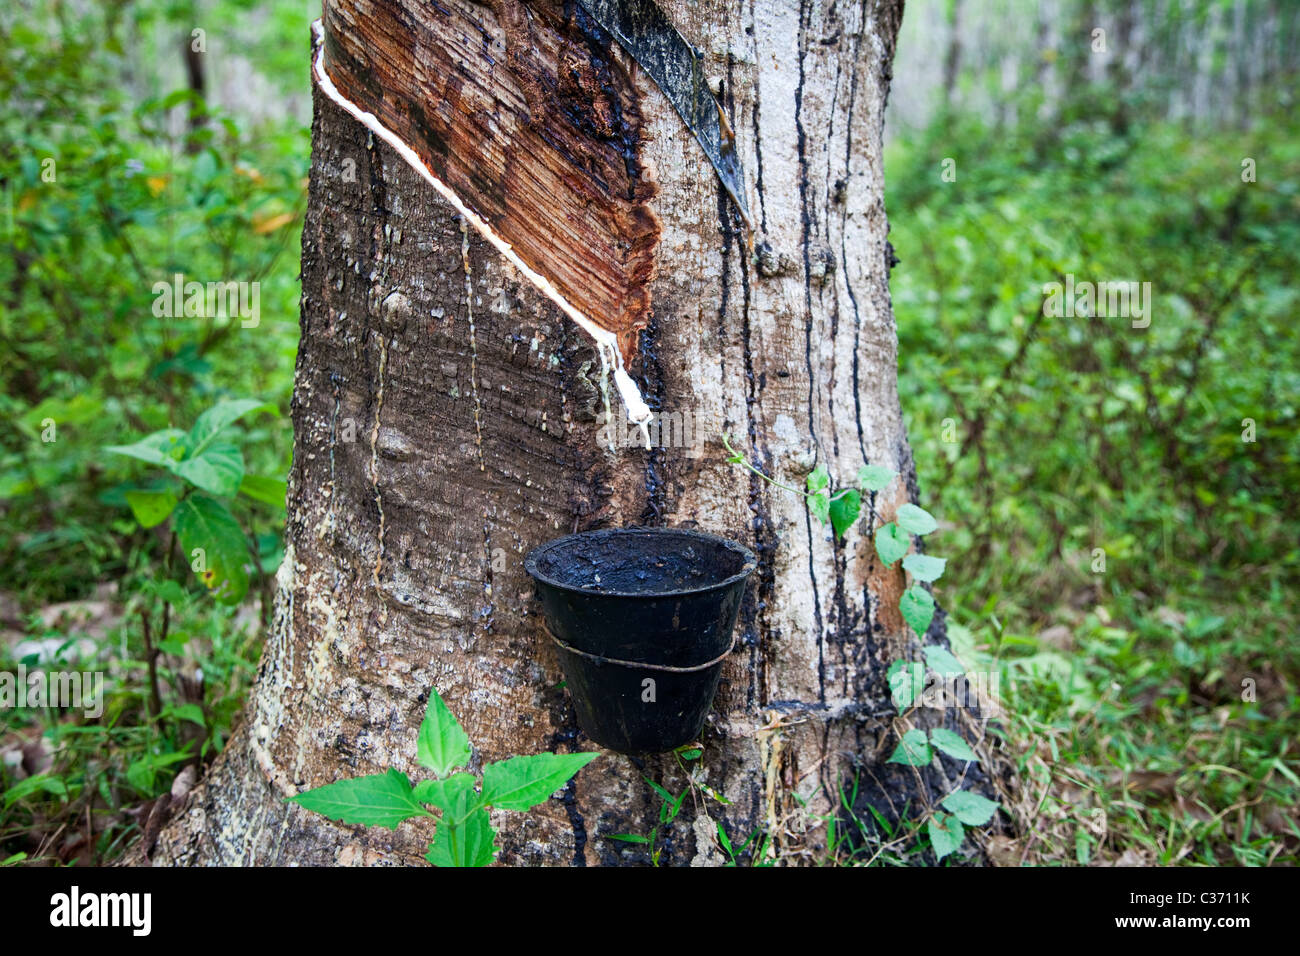 Latex Dripping from a Rubber Tree, Malaysia Stock Photo